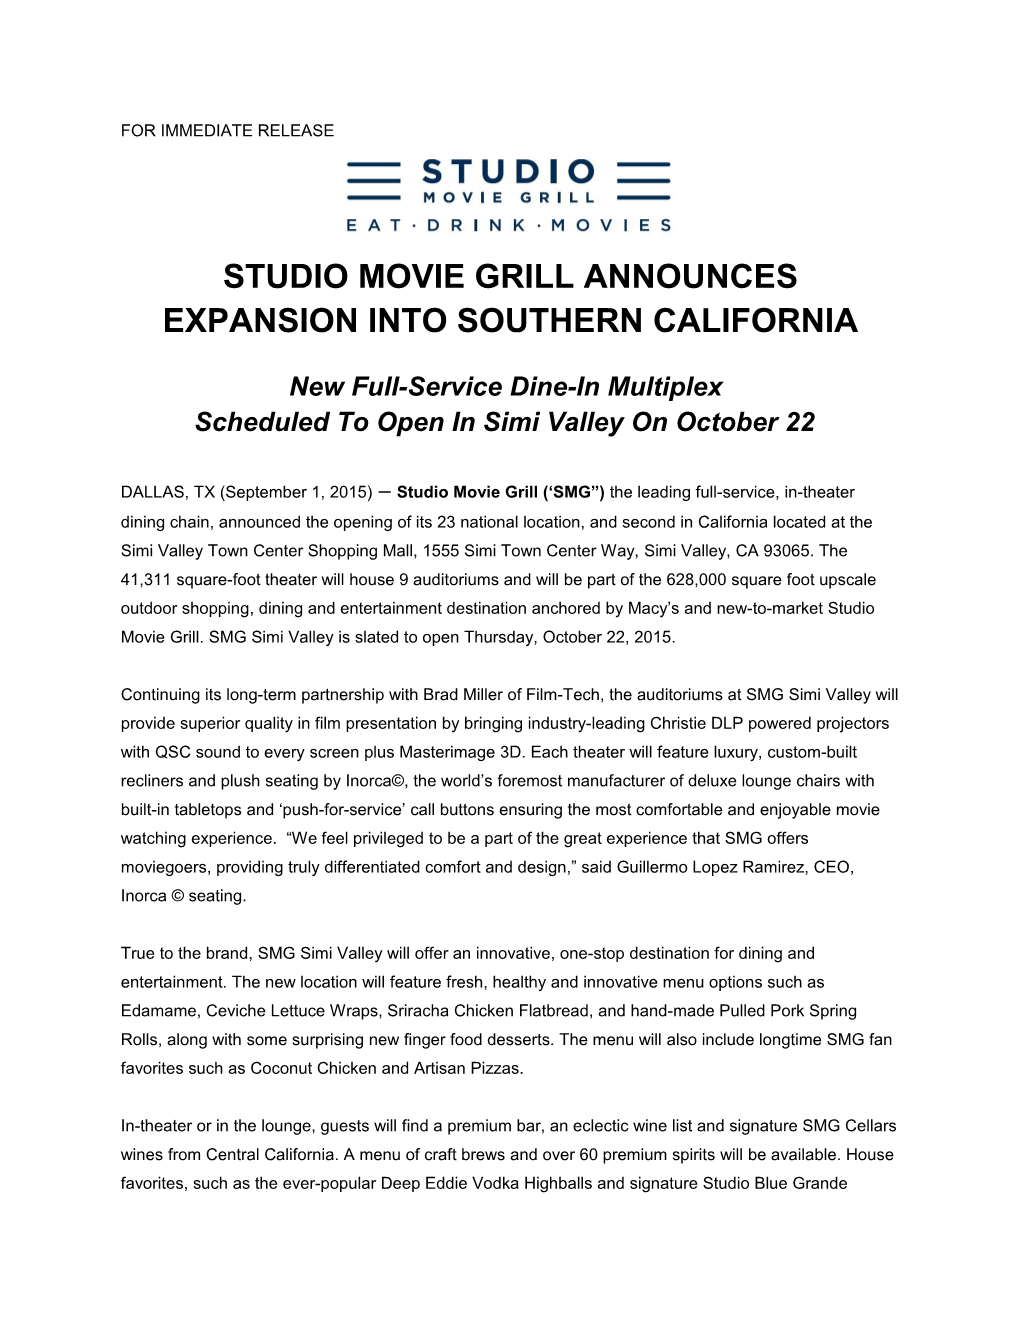 Studio Movie Grill Announces Expansion Into Southern California